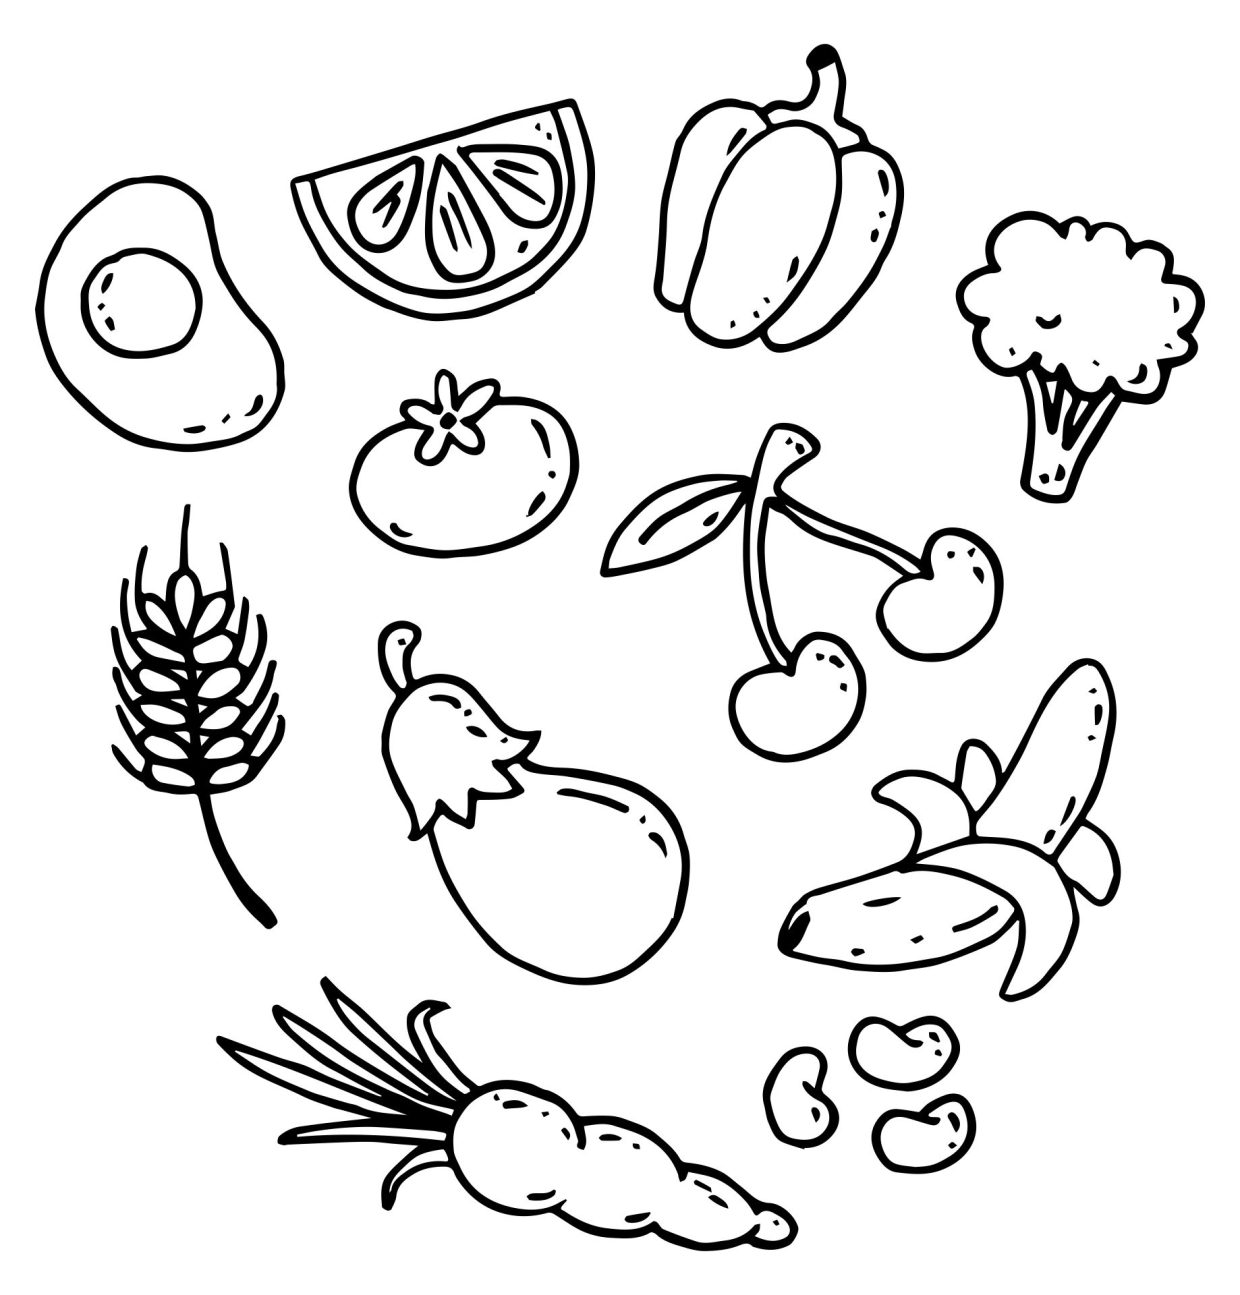 Fruit and Vegetable Coloring Pages 9